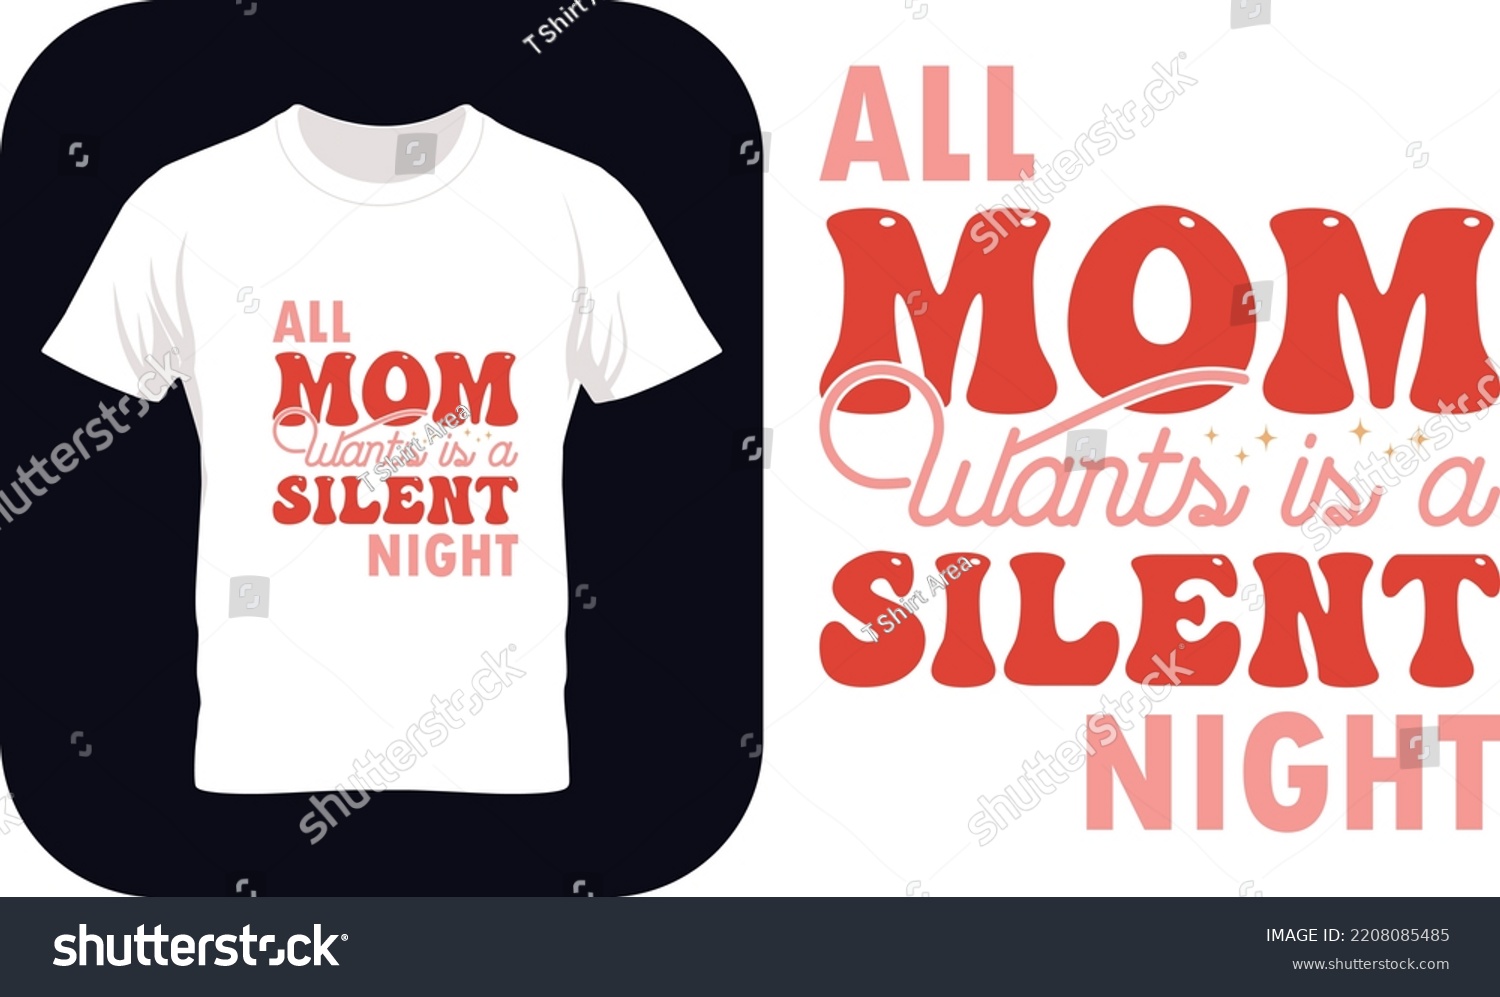 SVG of Christmas SVG Design Bundle, All mama wants is a Silent Night - Funny Mothers Day, Mother's Day Christmas Gifts svg